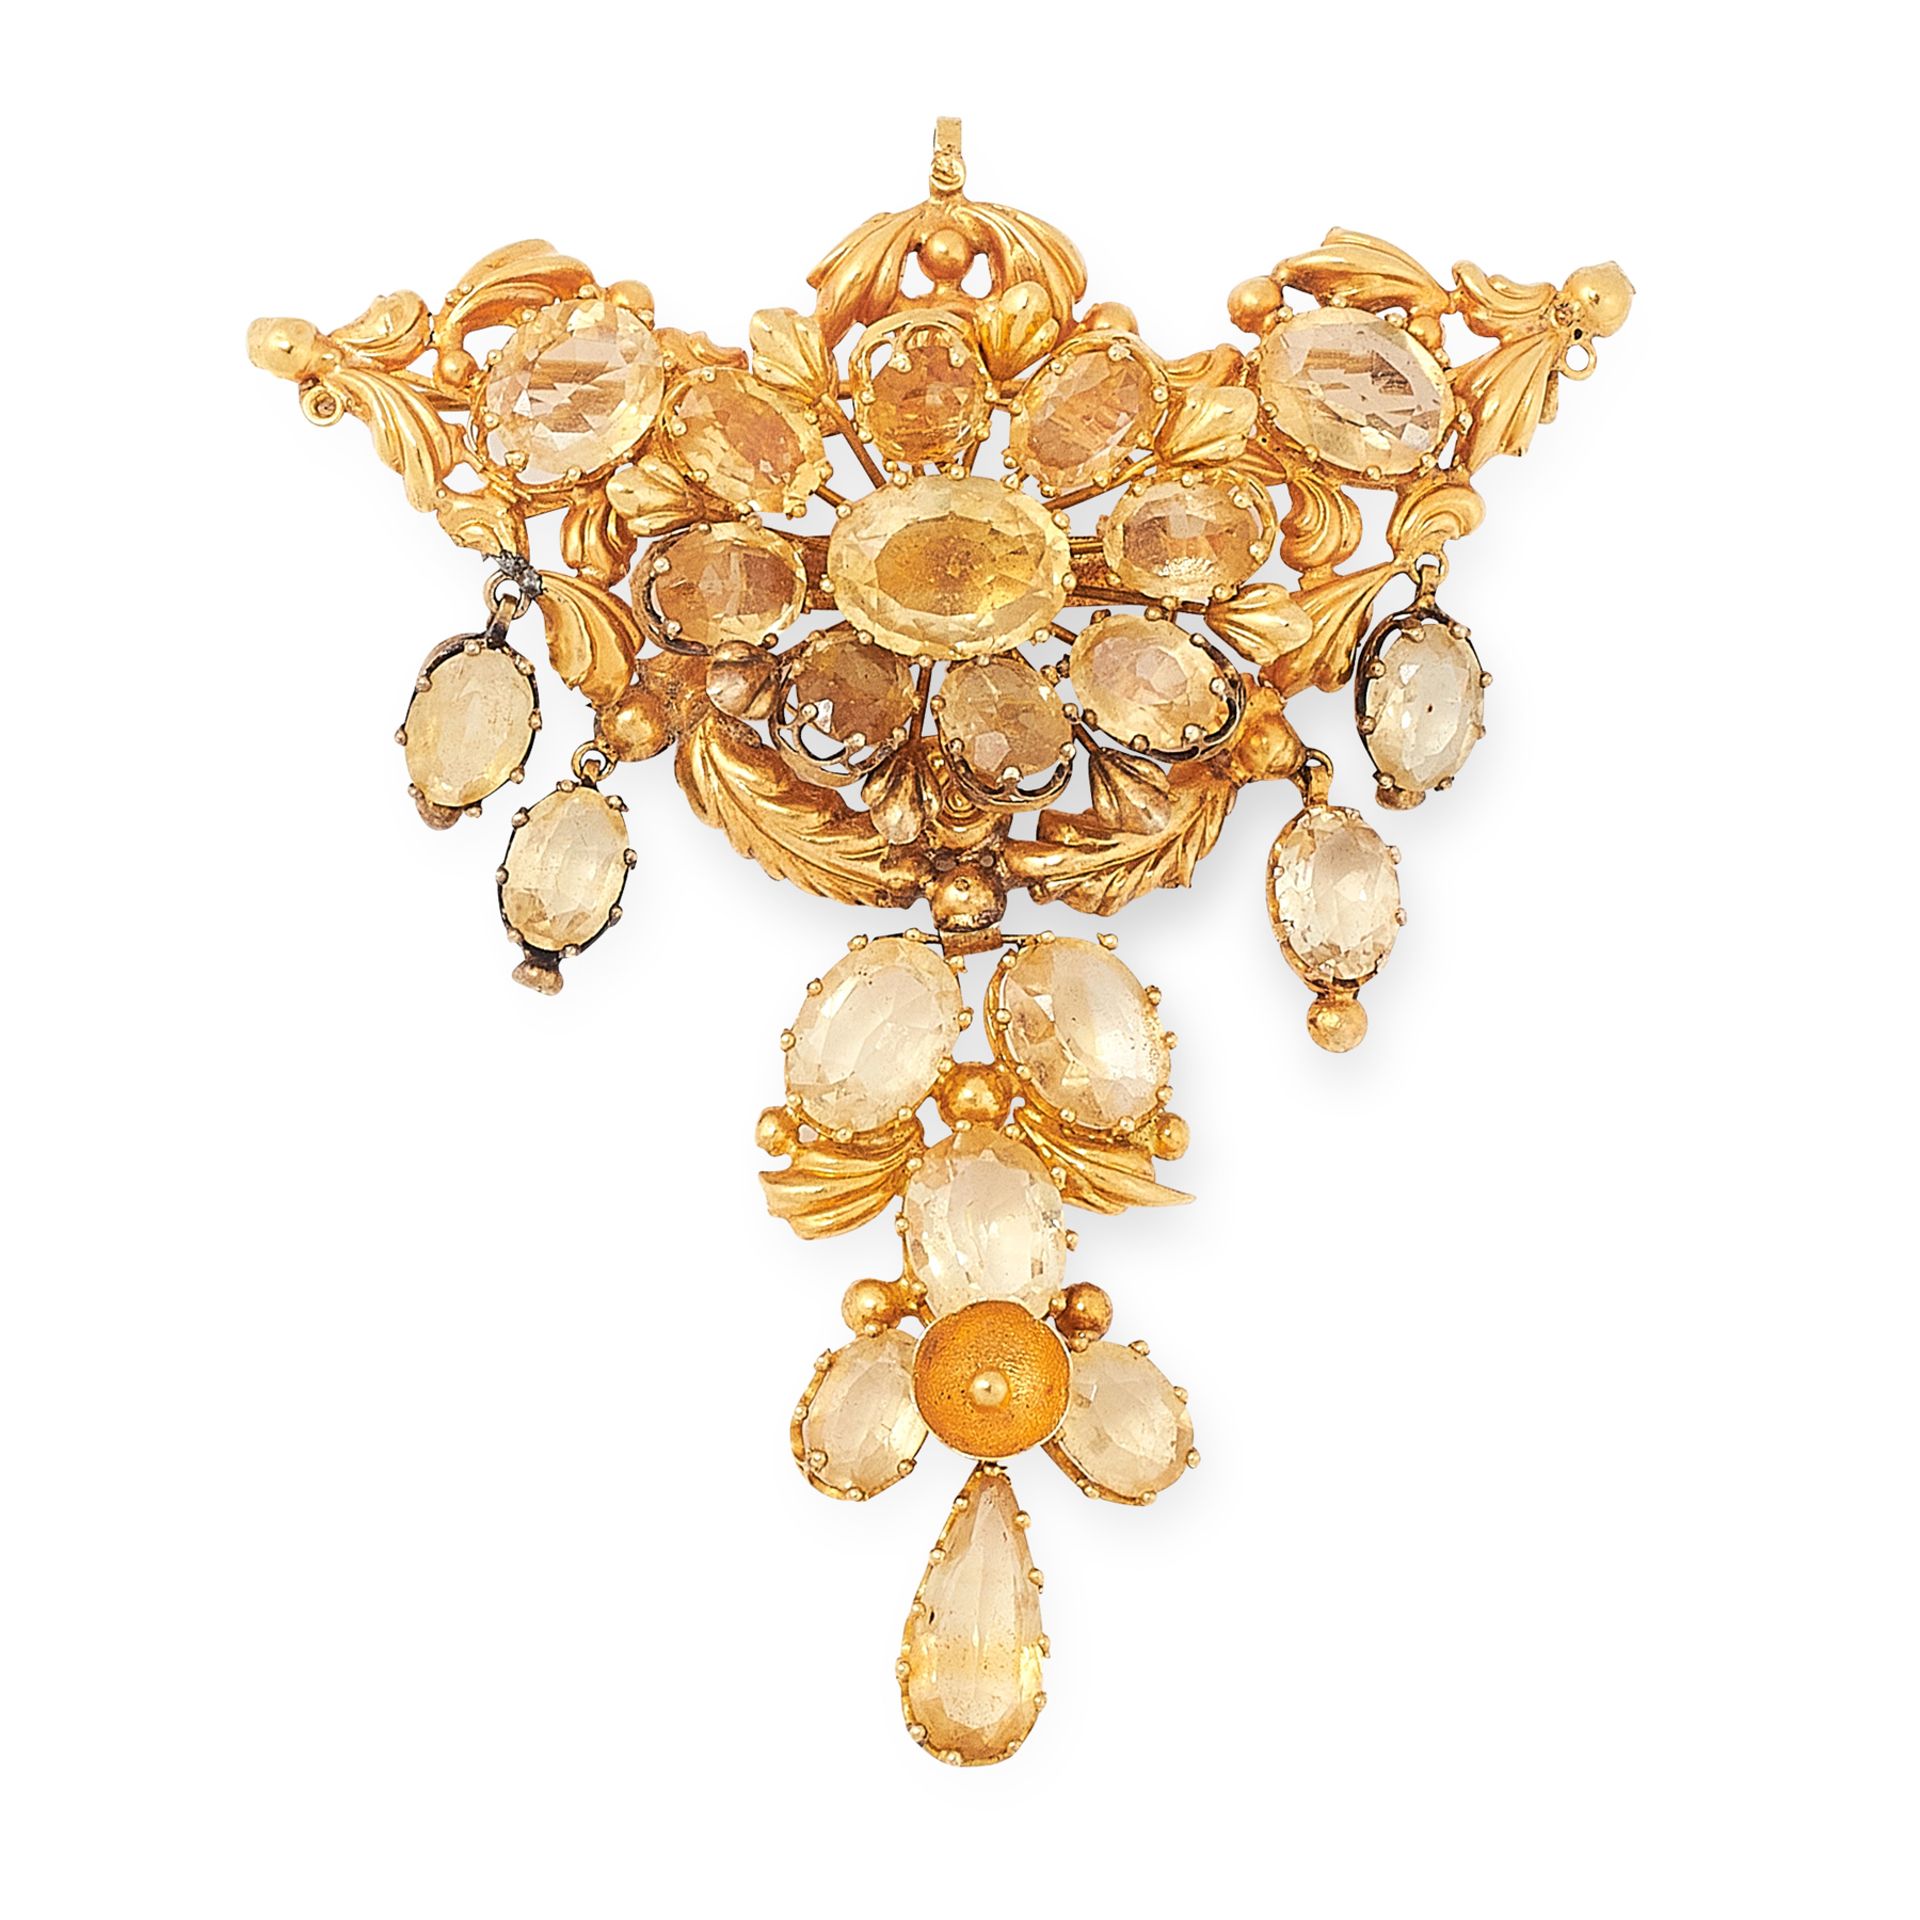 AN ANTIQUE CITRINE BROOCH in high carat yellow gold, designed as a cluster of oval cut citrines